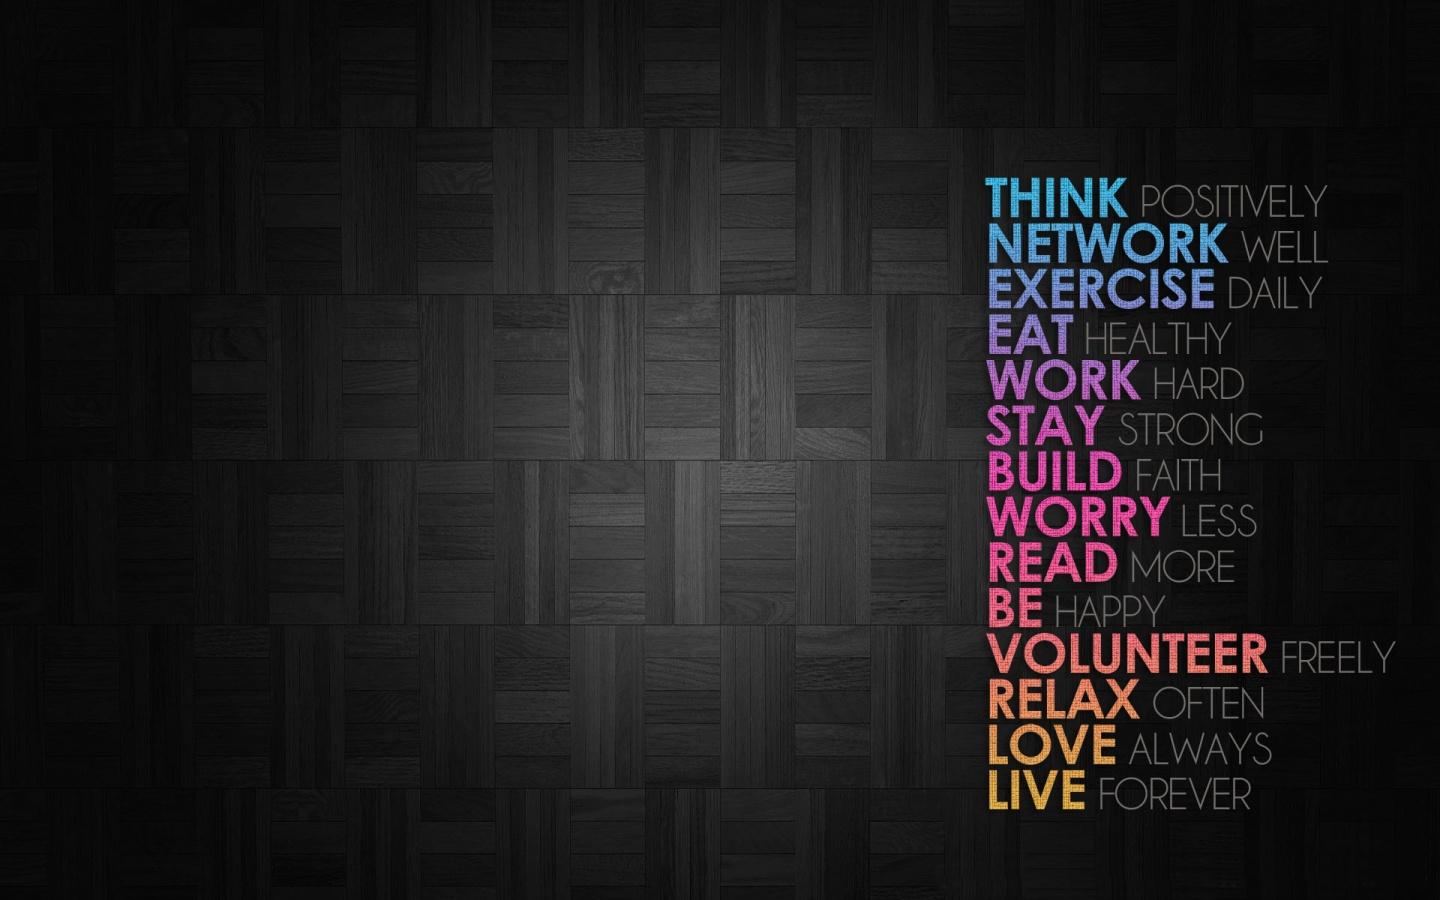 Positive Thinking Wallpapers - Wallpaper Cave